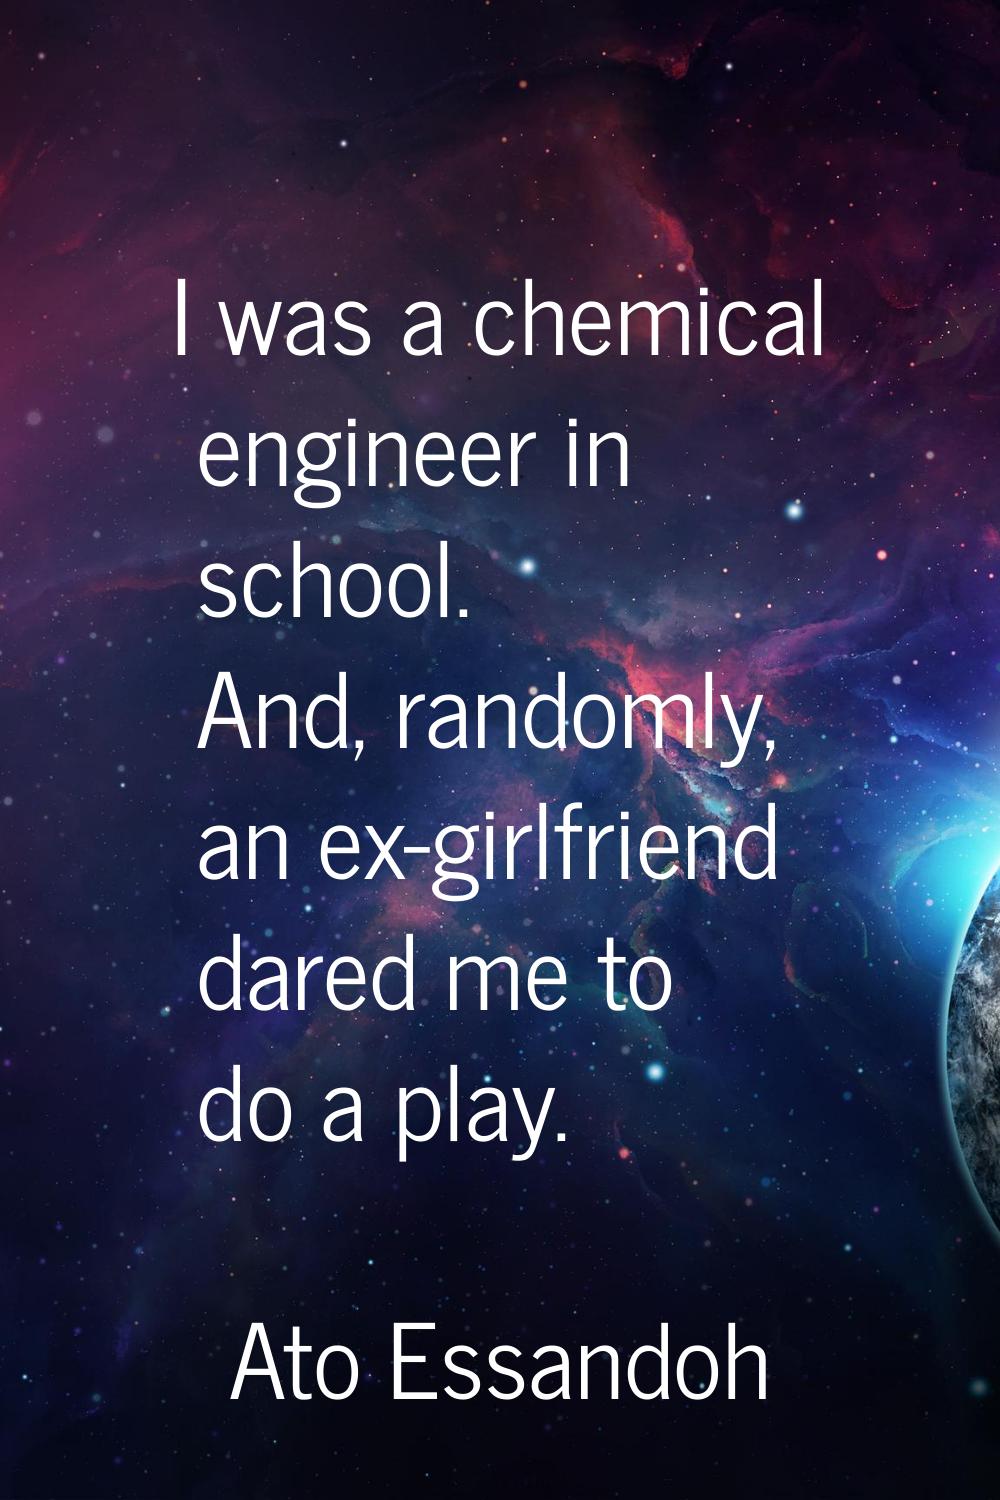 I was a chemical engineer in school. And, randomly, an ex-girlfriend dared me to do a play.